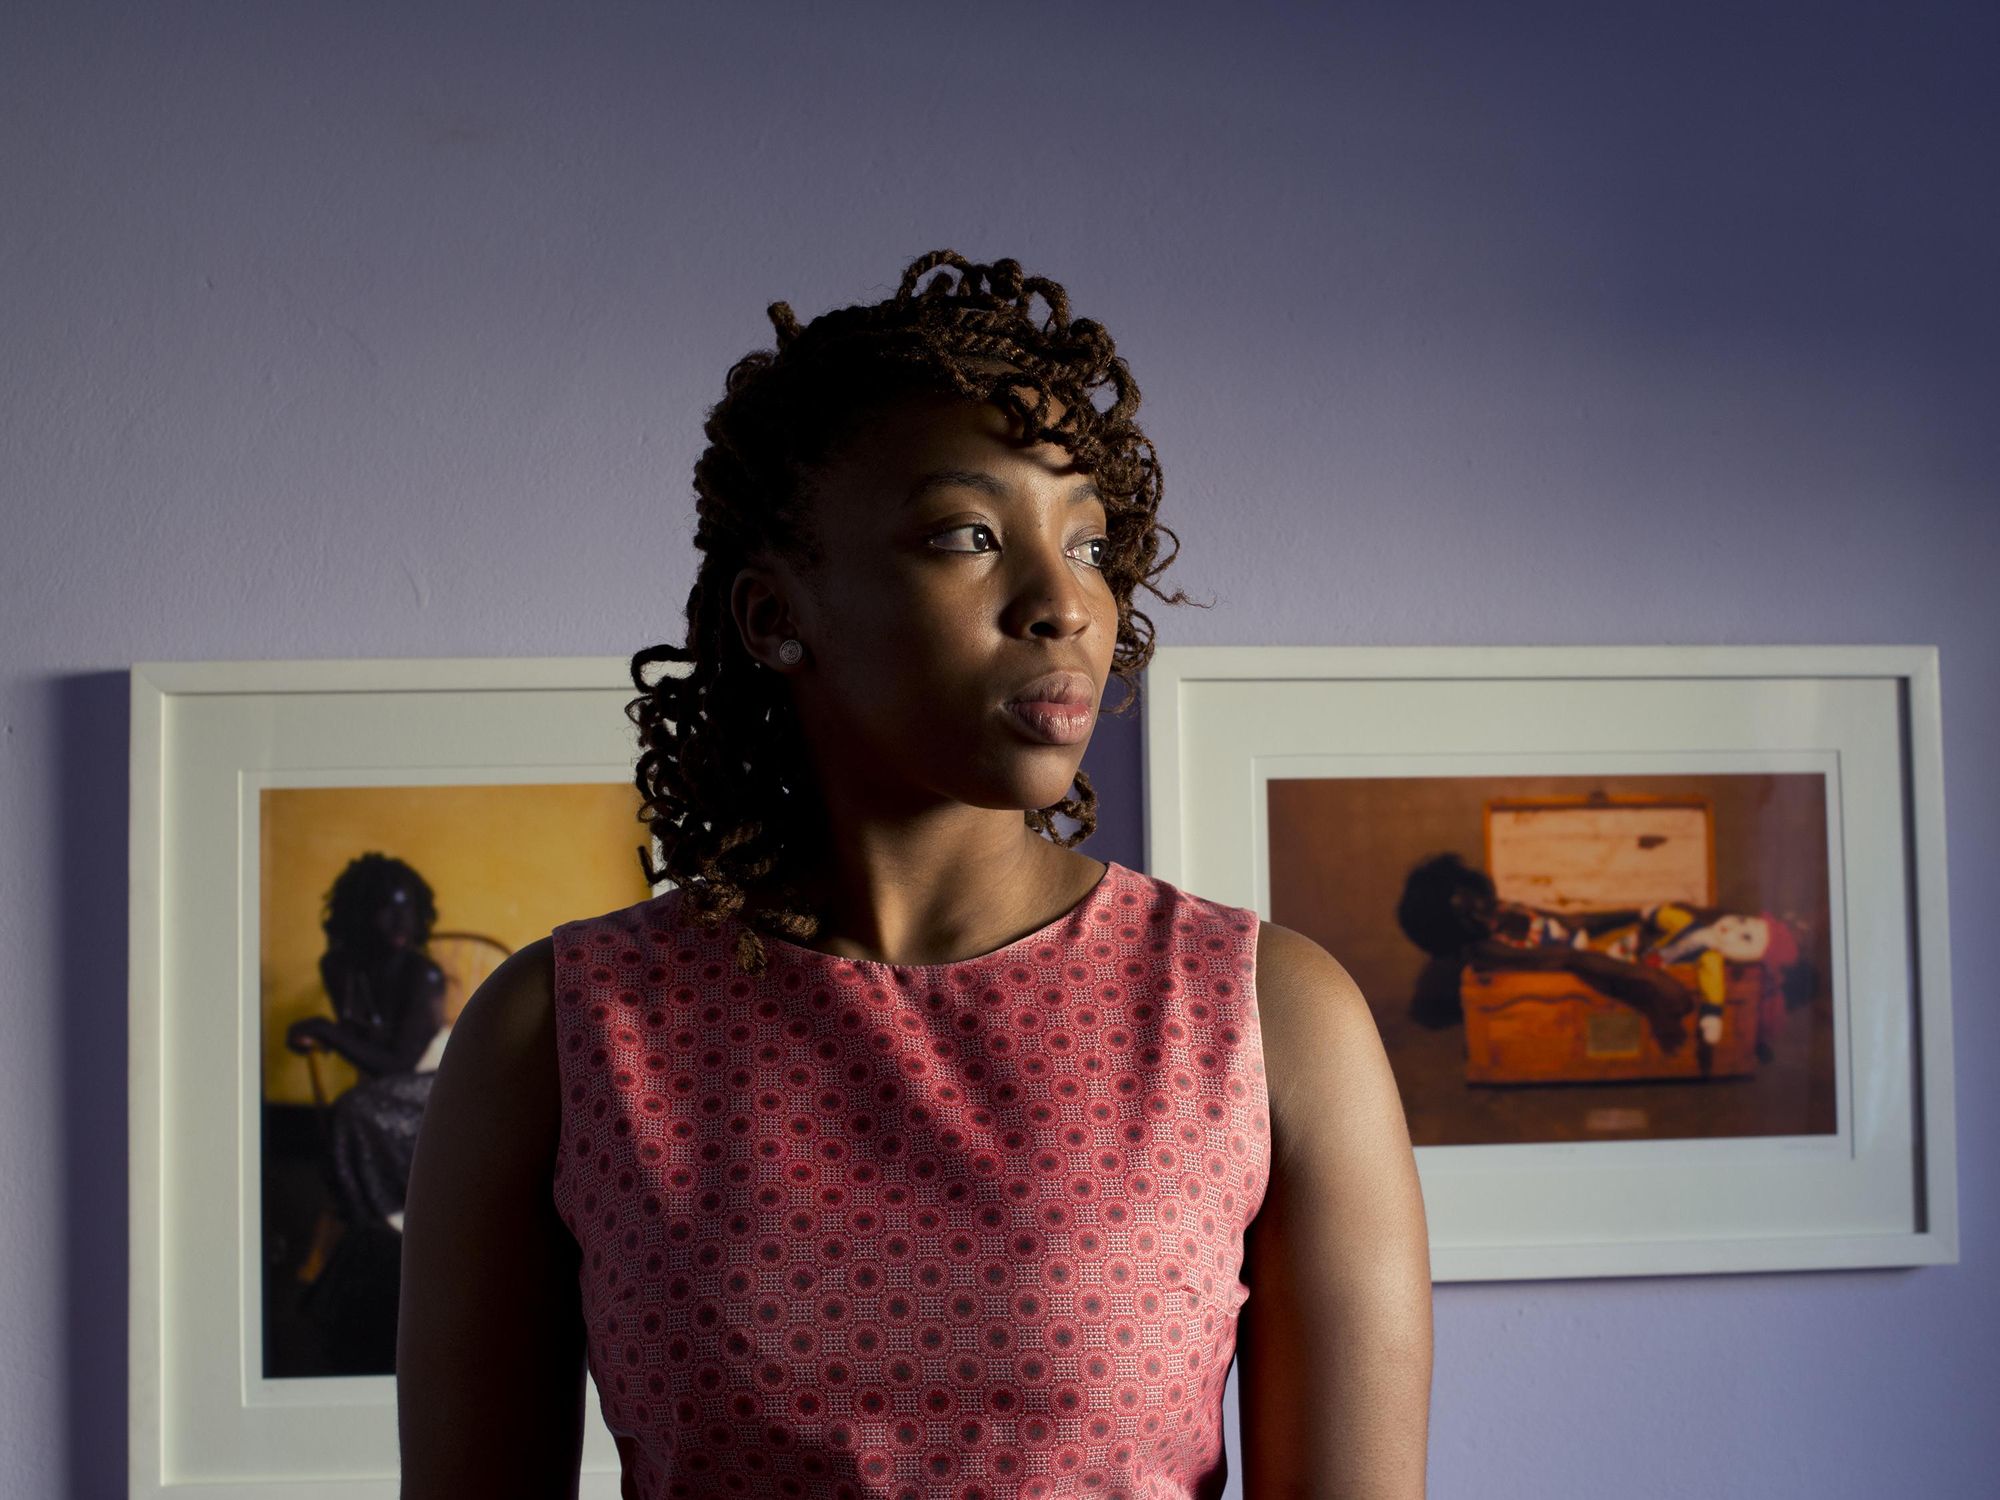 An image of artist ​Lebohang Kganye standing in front of photographs